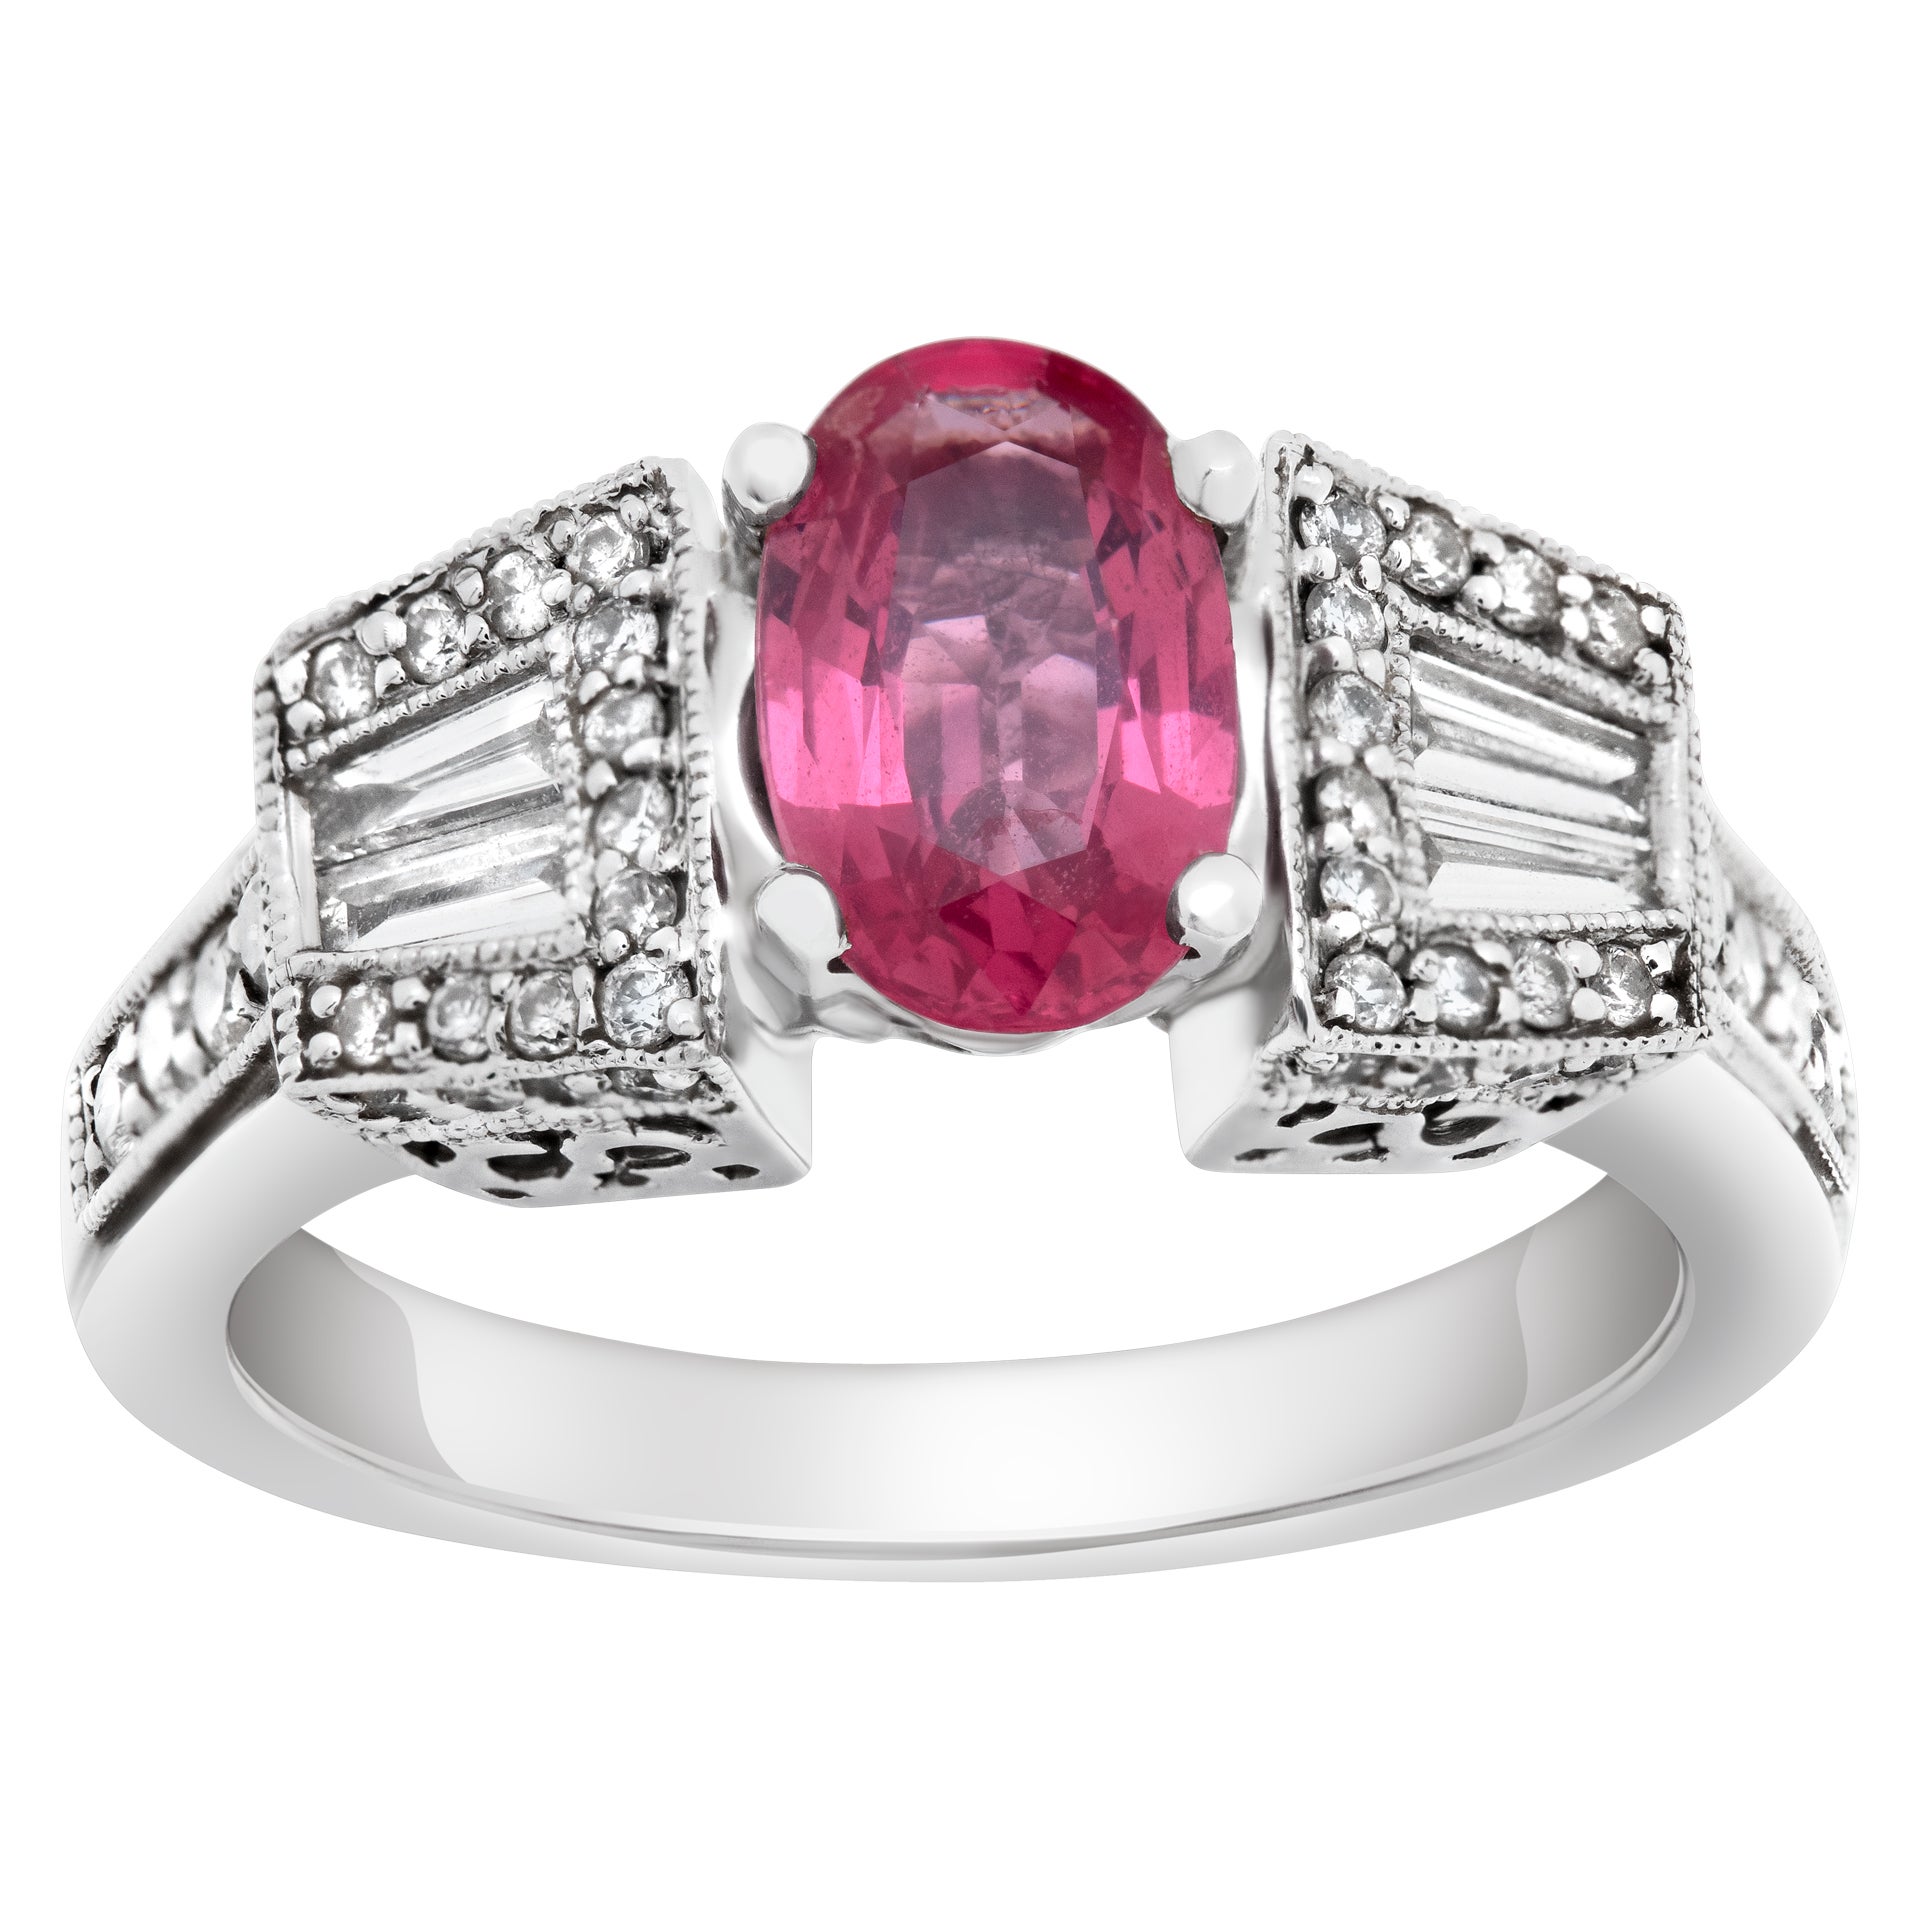 14K White Gold Ring with Oval Brilliant Cut Pink Spinel 'Approx. 2 Carats'